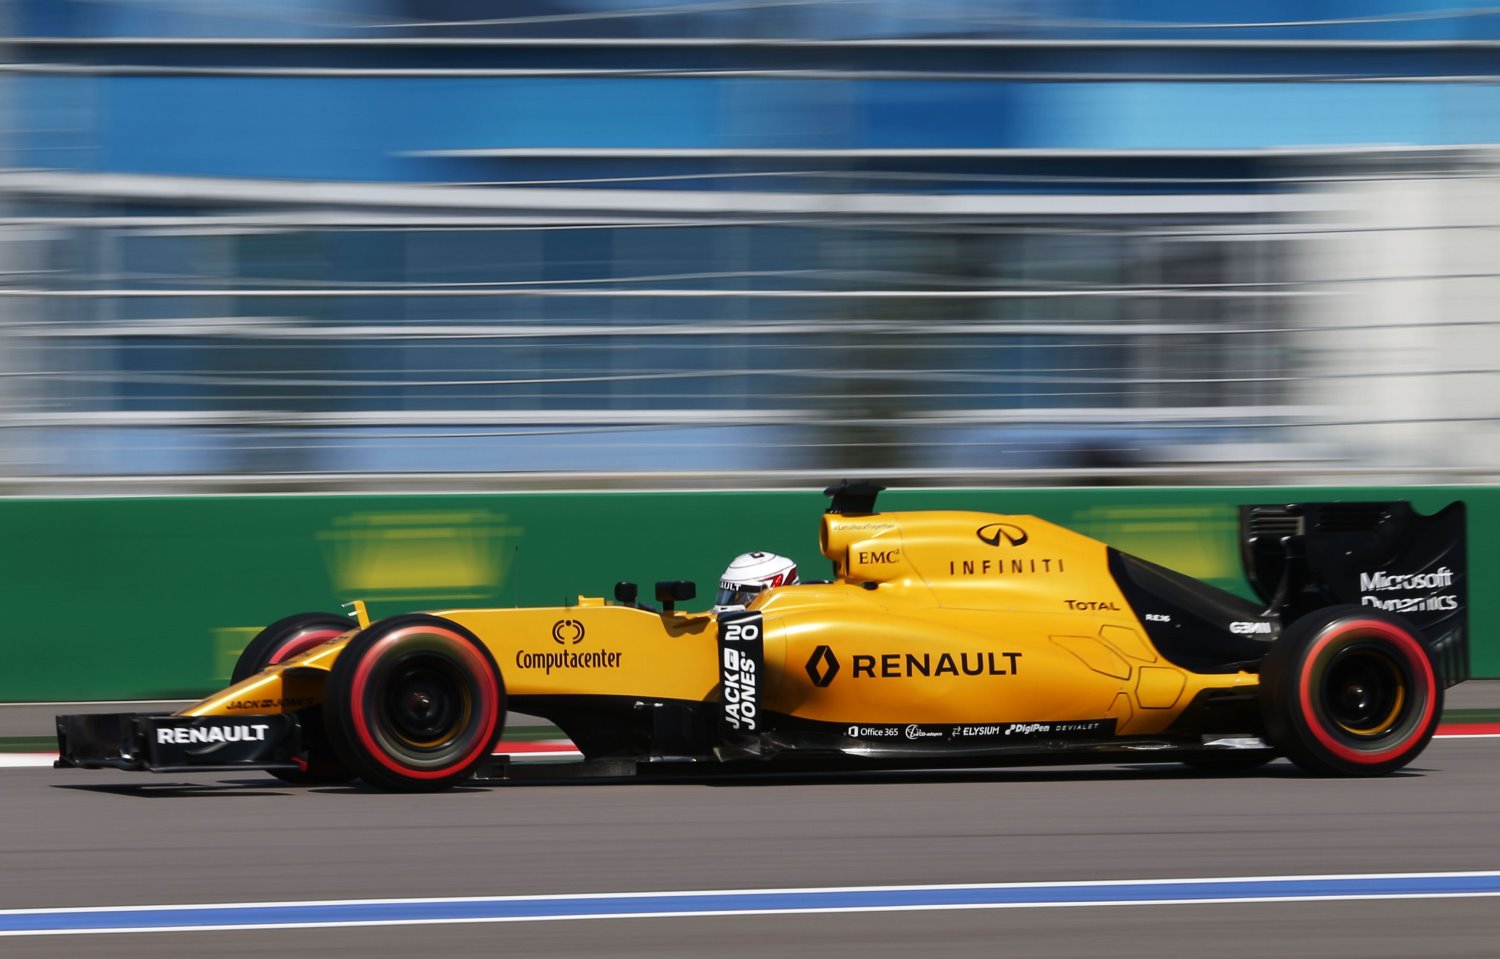 Renault with Magnussen at the wheel